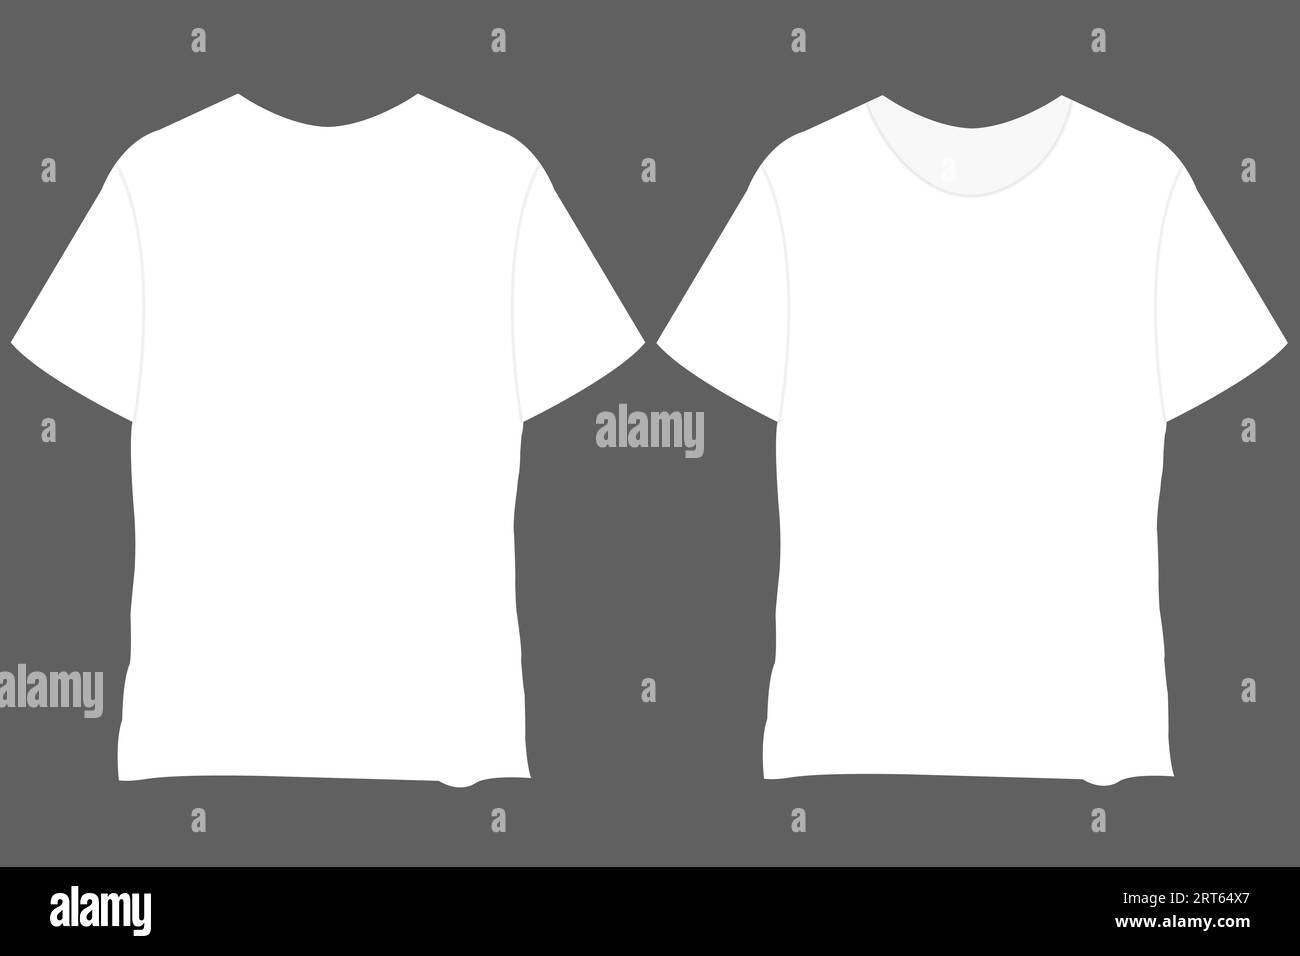 TShirt Mockup vector template. Blank white T-Shirts Front view presentation for print. Men's white Mock-up Ready to replace design. Short sleeve casua Stock Vector